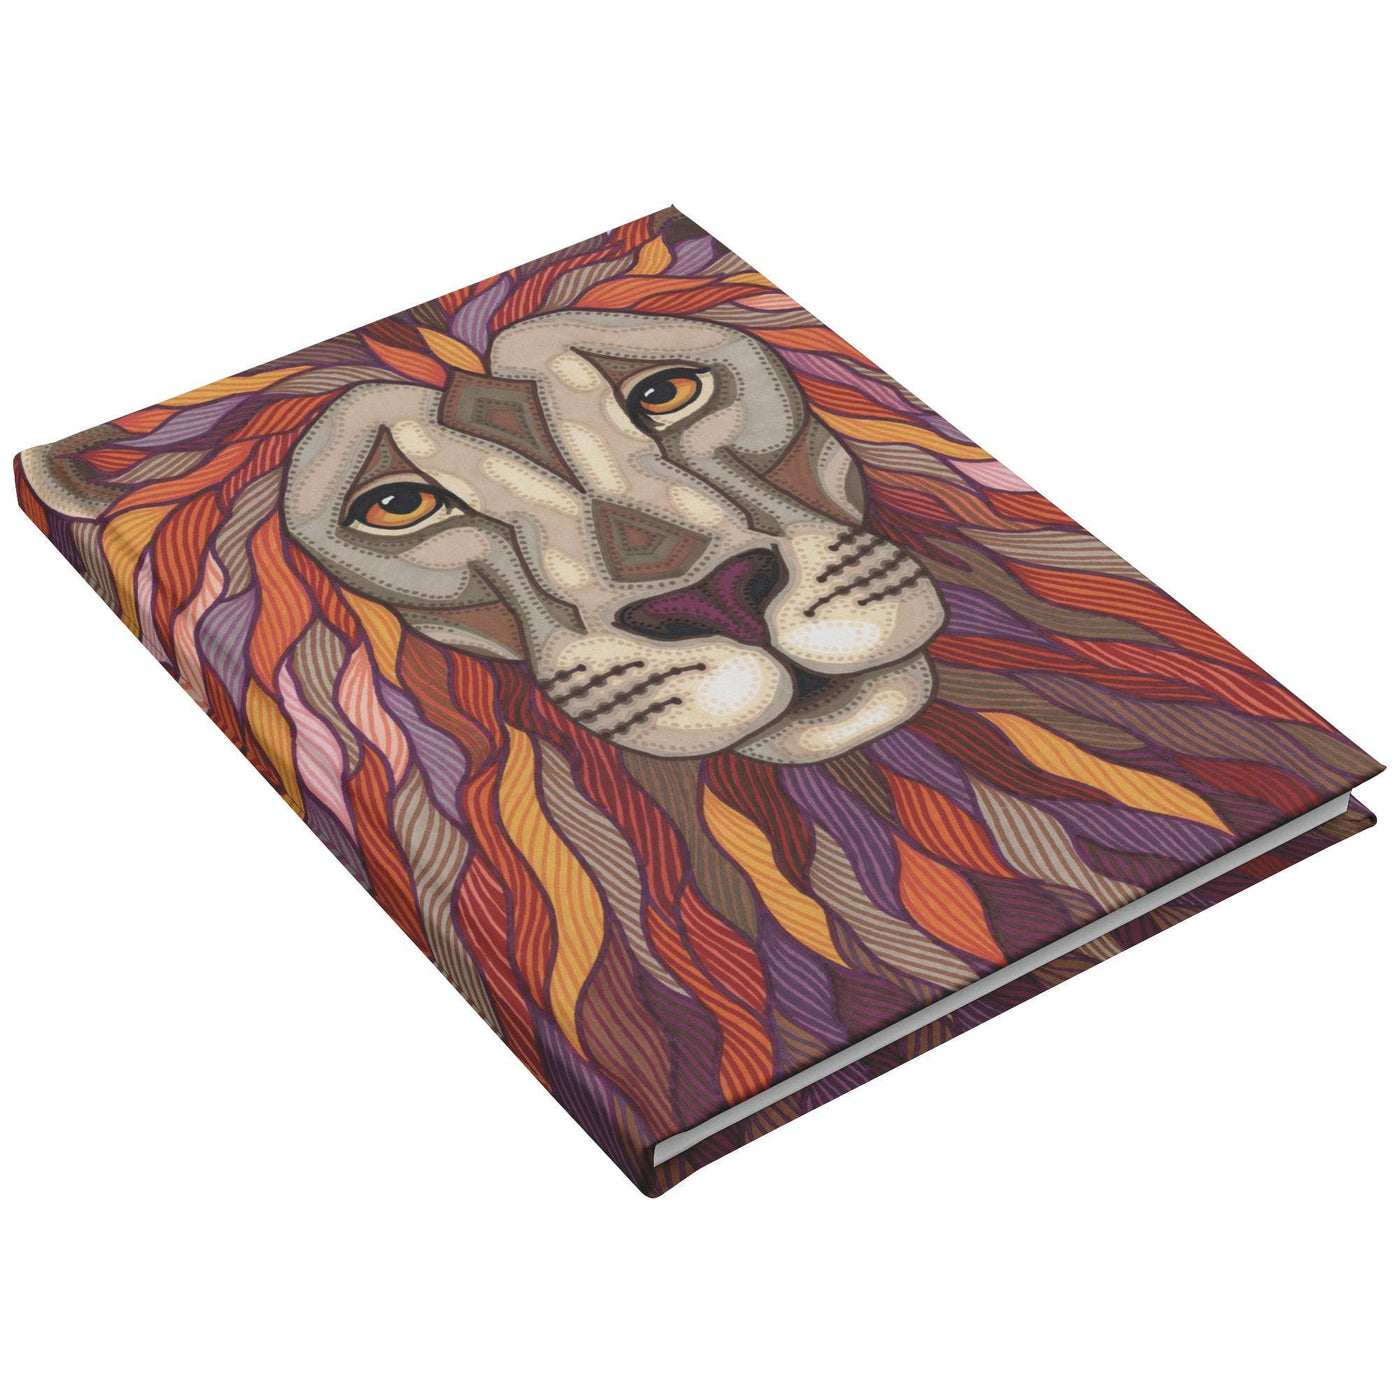 A Lion Pride Journal with a colorful, detailed illustration of a lion's face on the cover, featuring rich hues and intricate patterns.